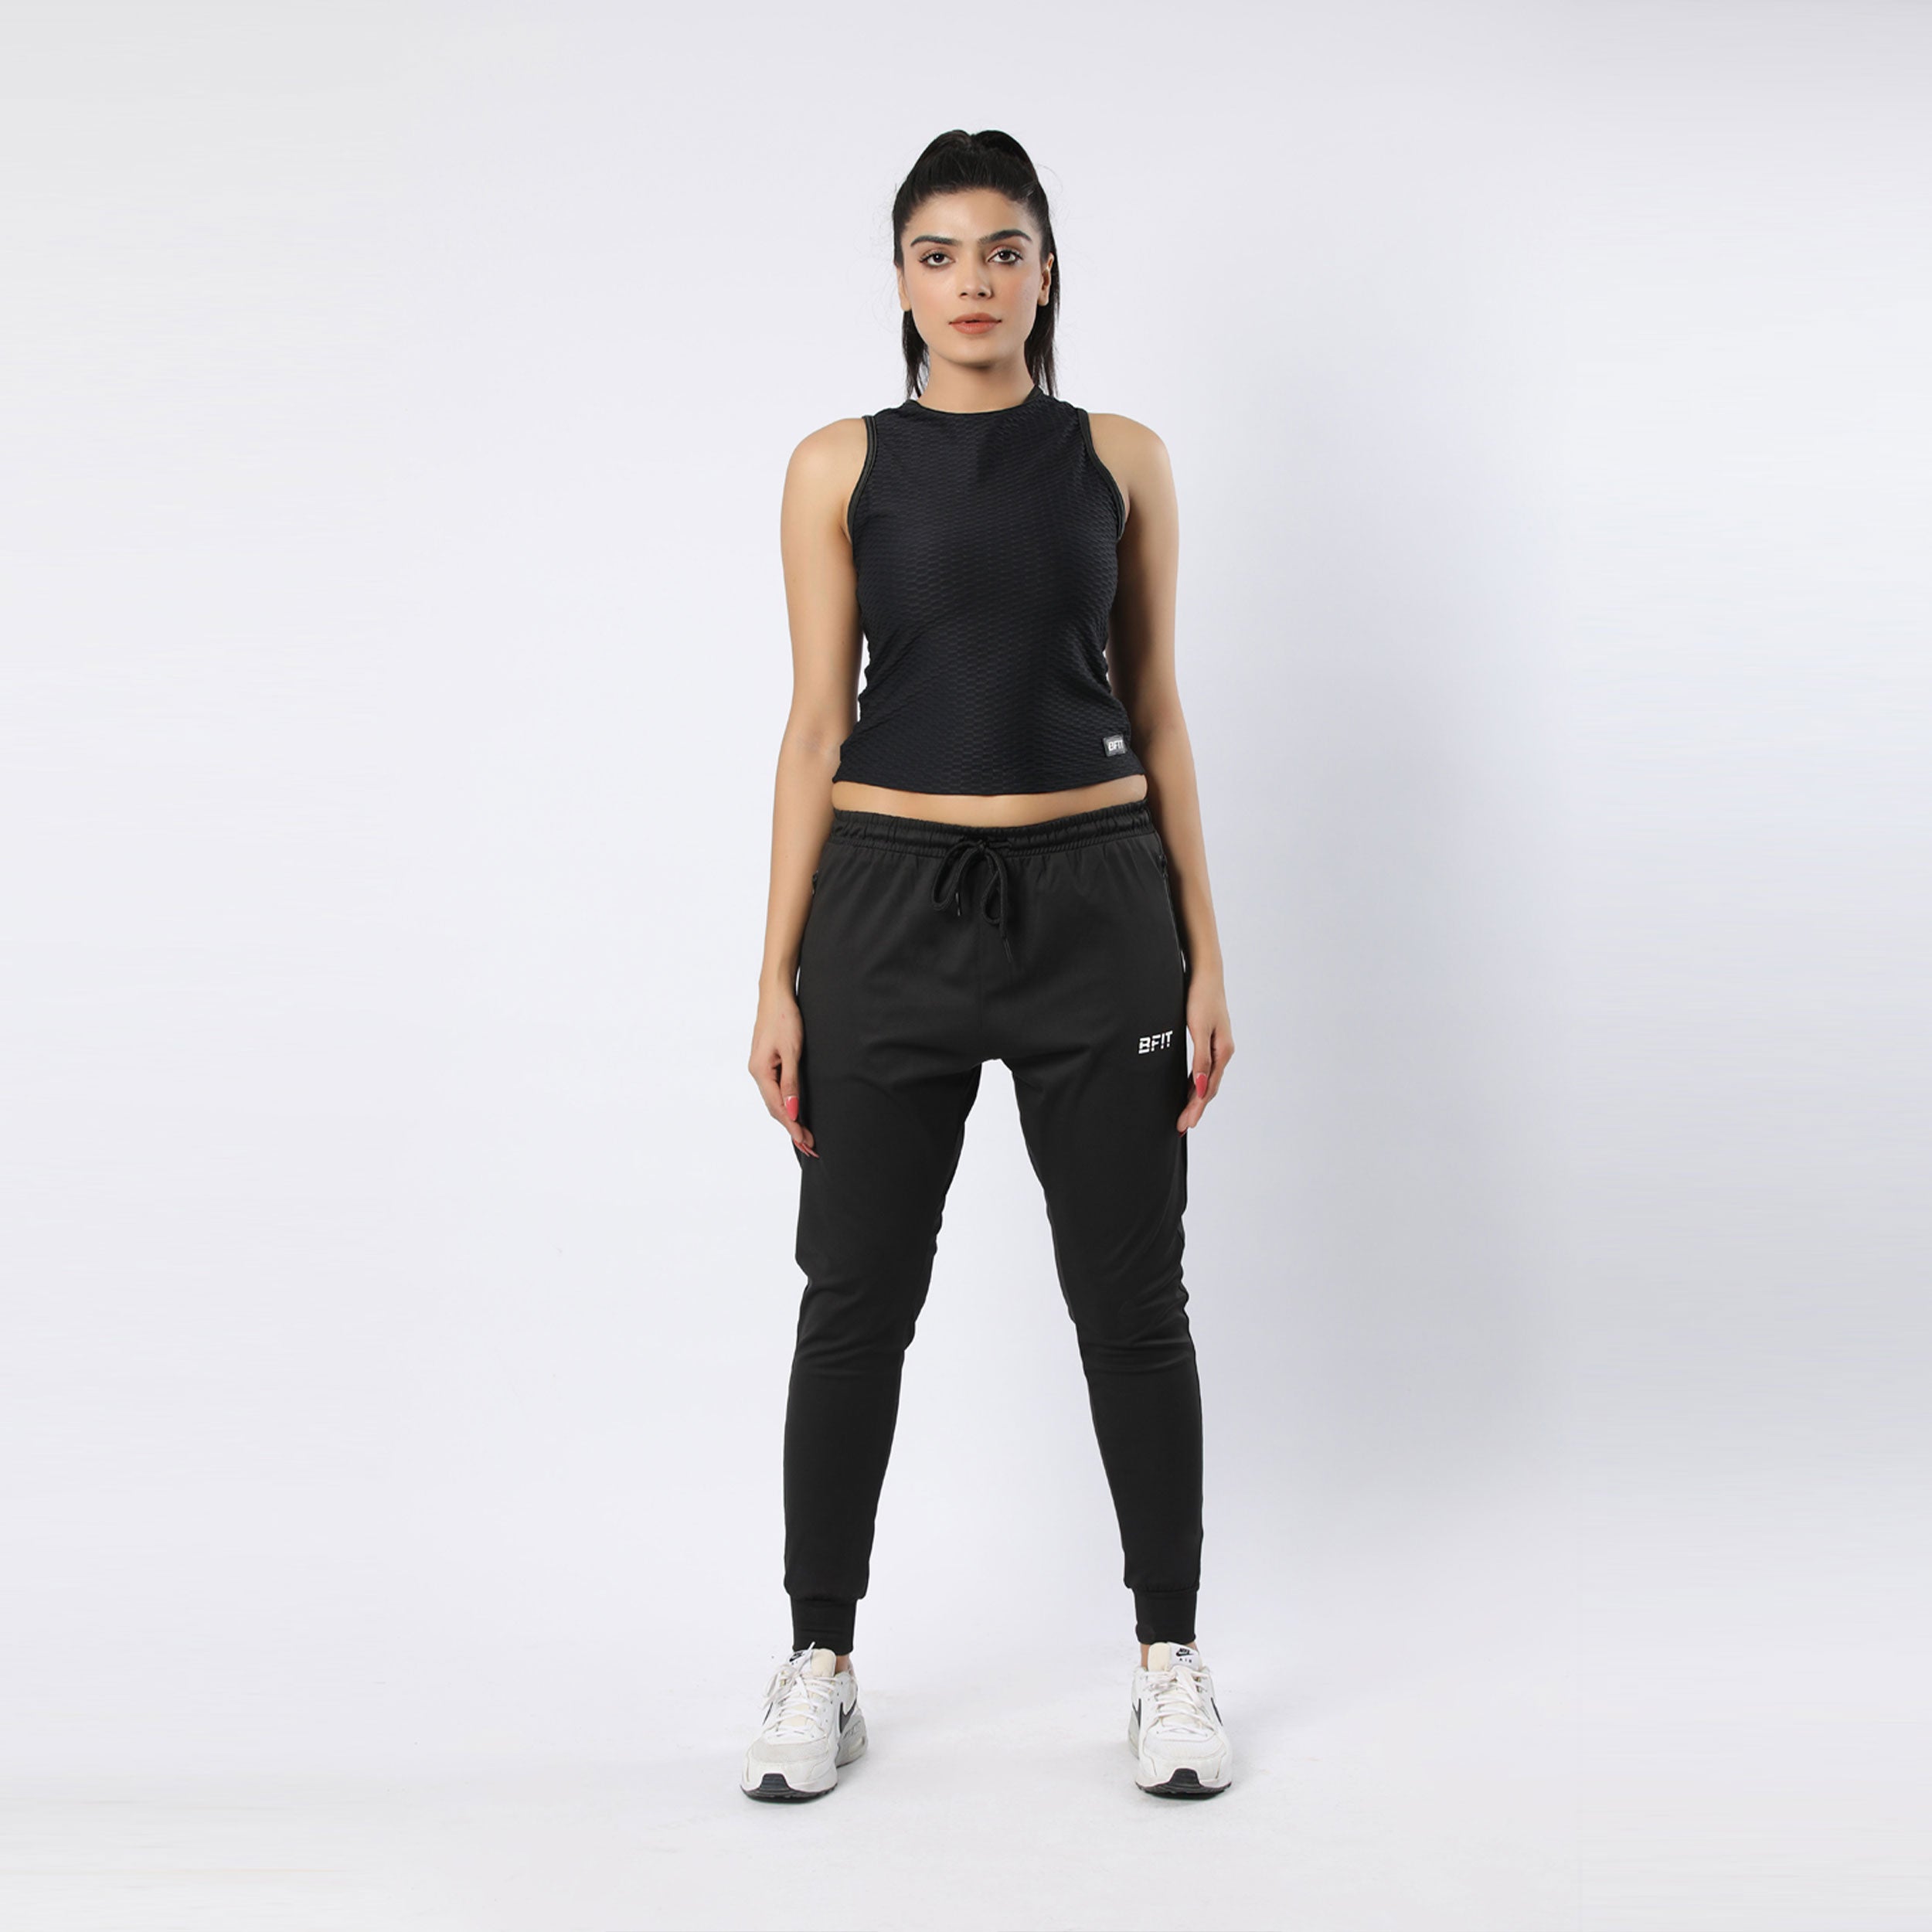 Cropped Stretchy Black Tank Top